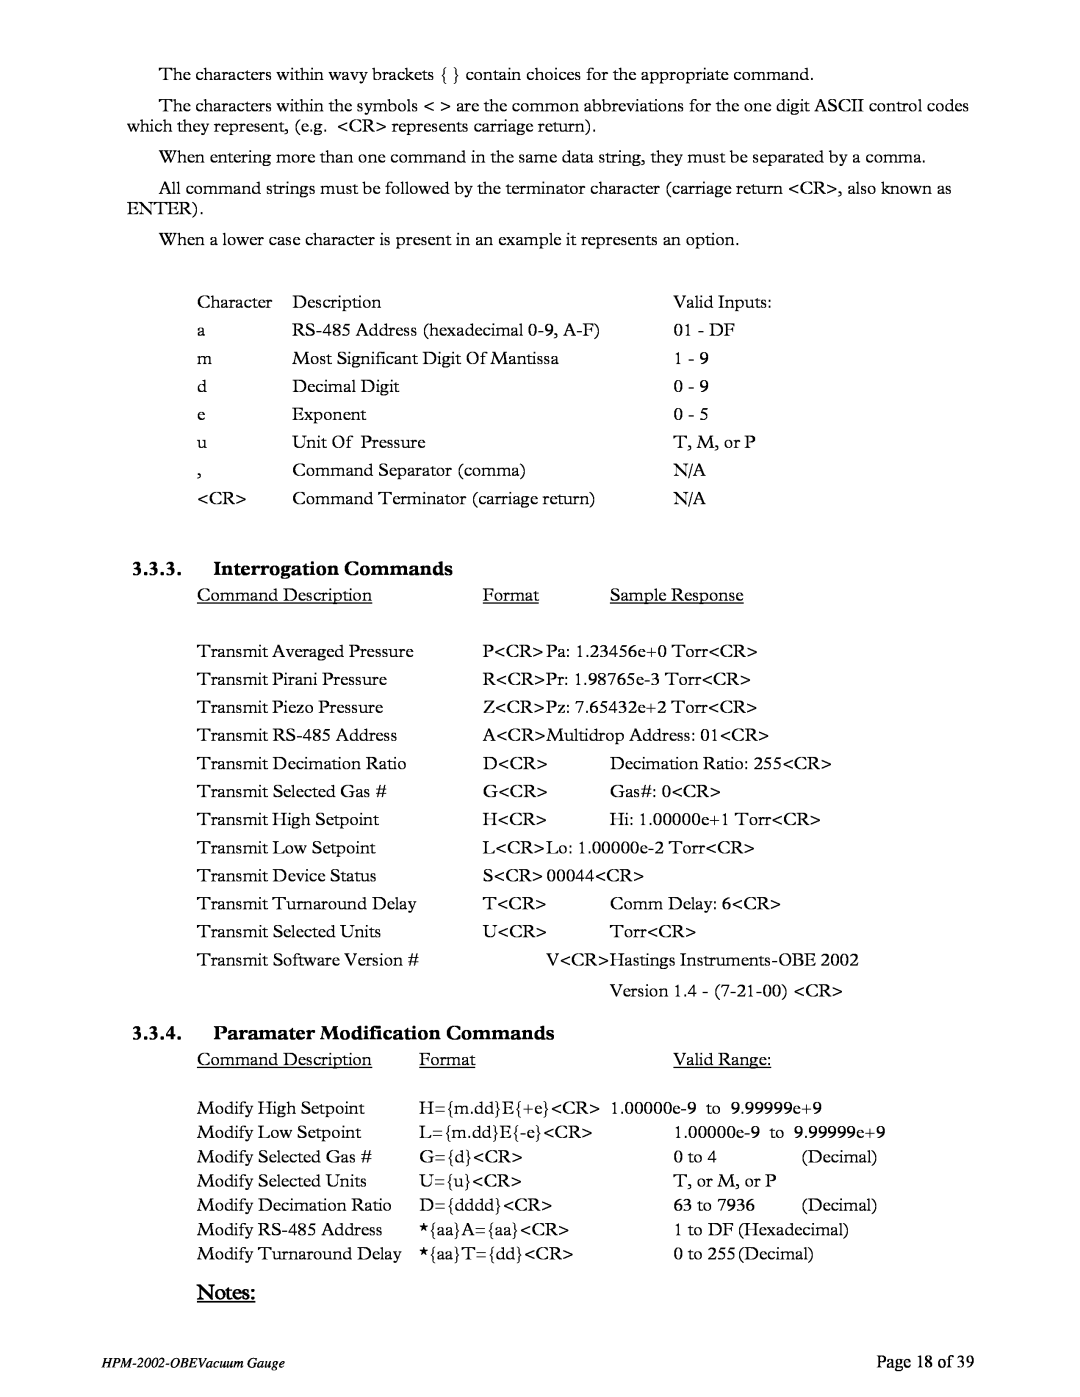 Teledyne HPM-2002-OBE instruction manual Interrogation Commands, Paramater Modification Commands, Page 18 of 